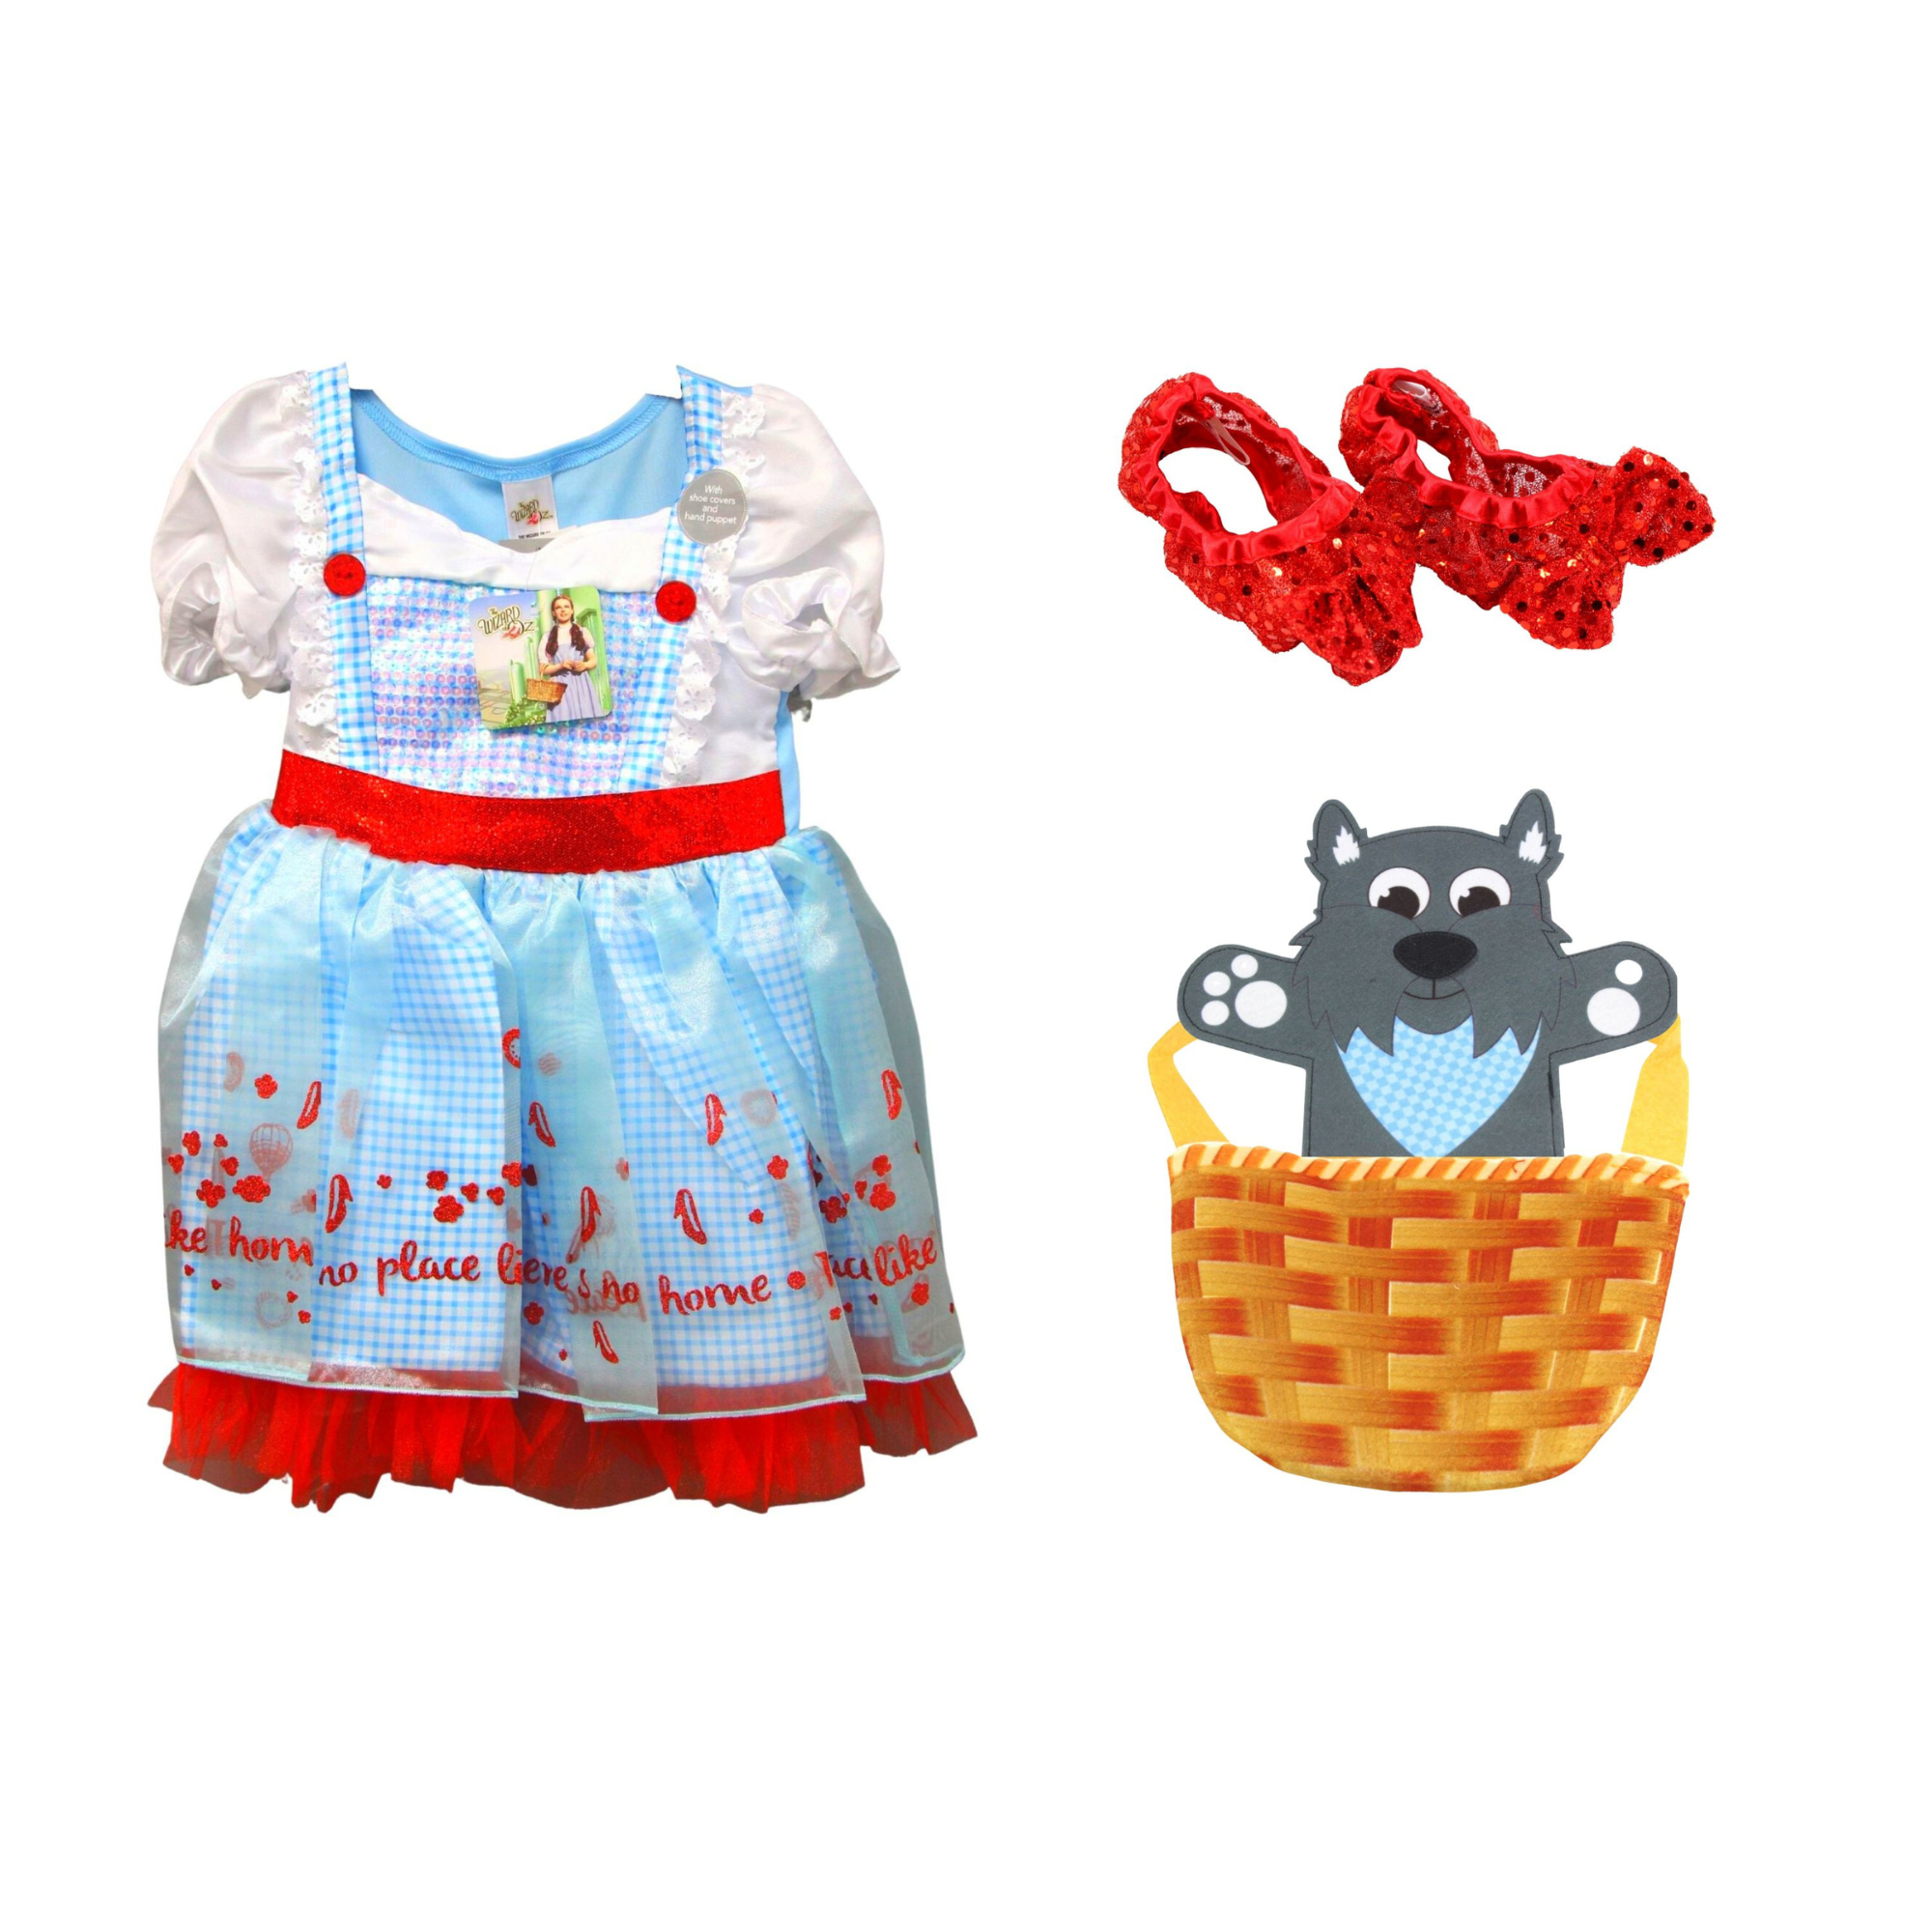 The Wizard of Oz Dorothy Sequin Children's Fancy Dress Costume Includes Shoe Covers, Hand Puppet and Bag - Toptoys2u